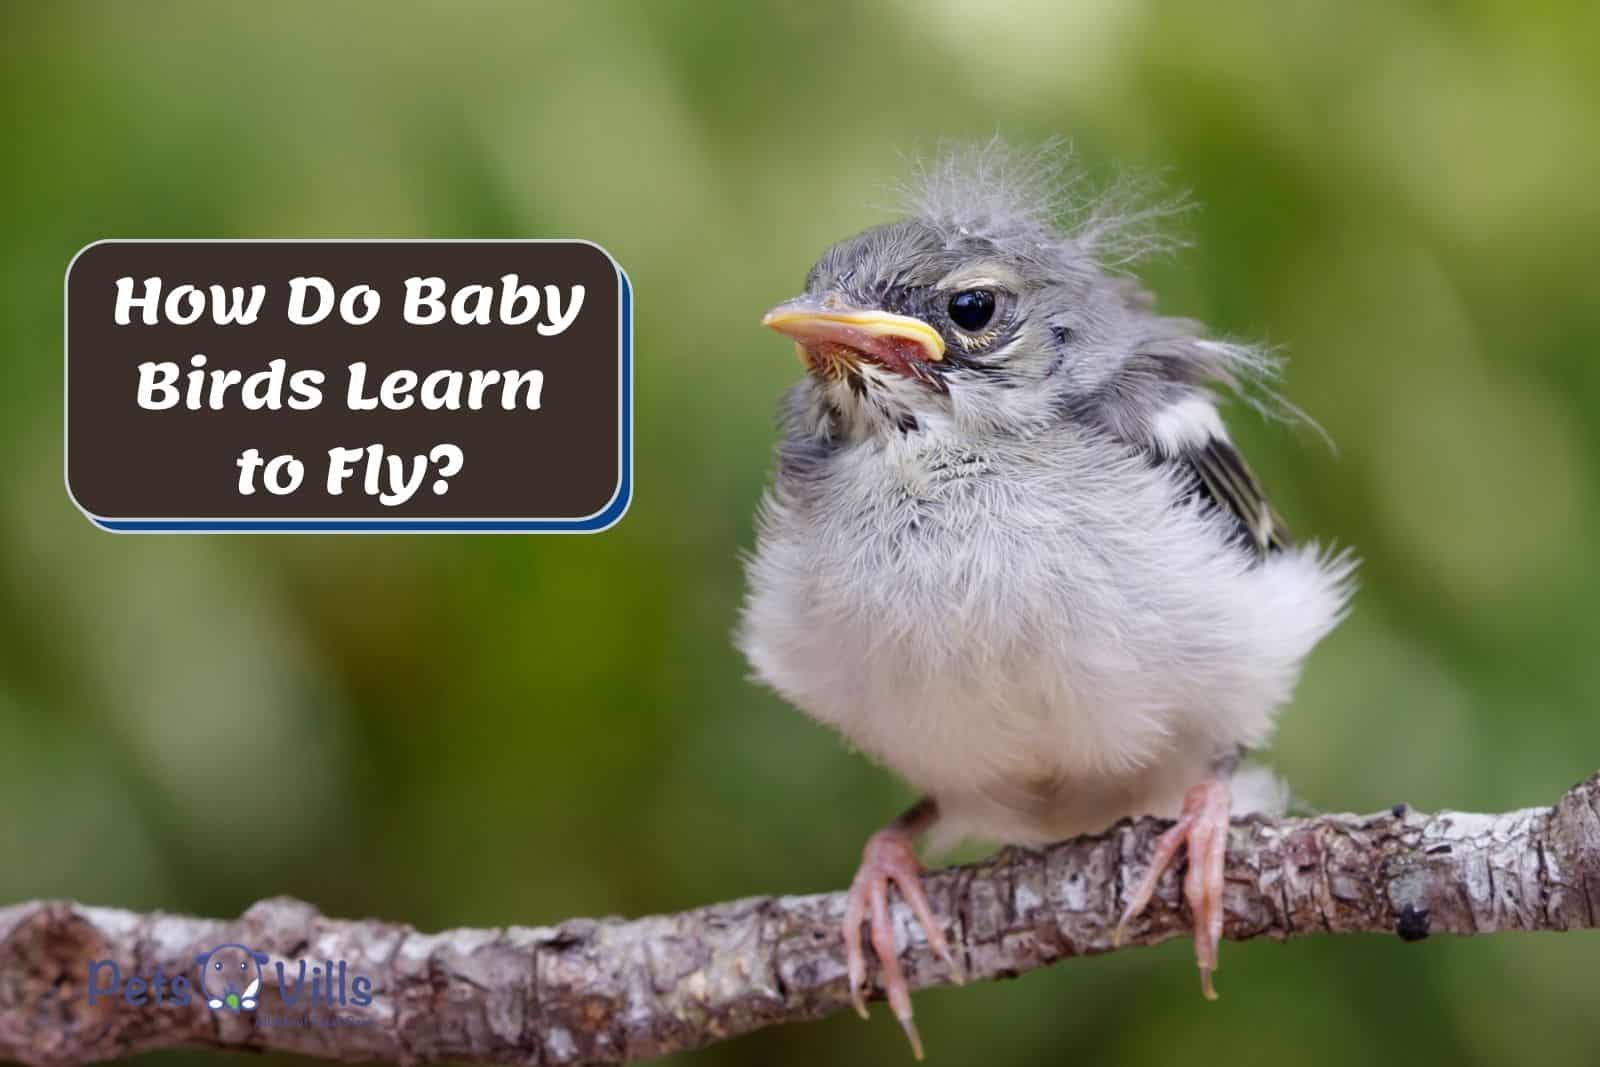 baby bird beside how do baby birds learn to fly poster